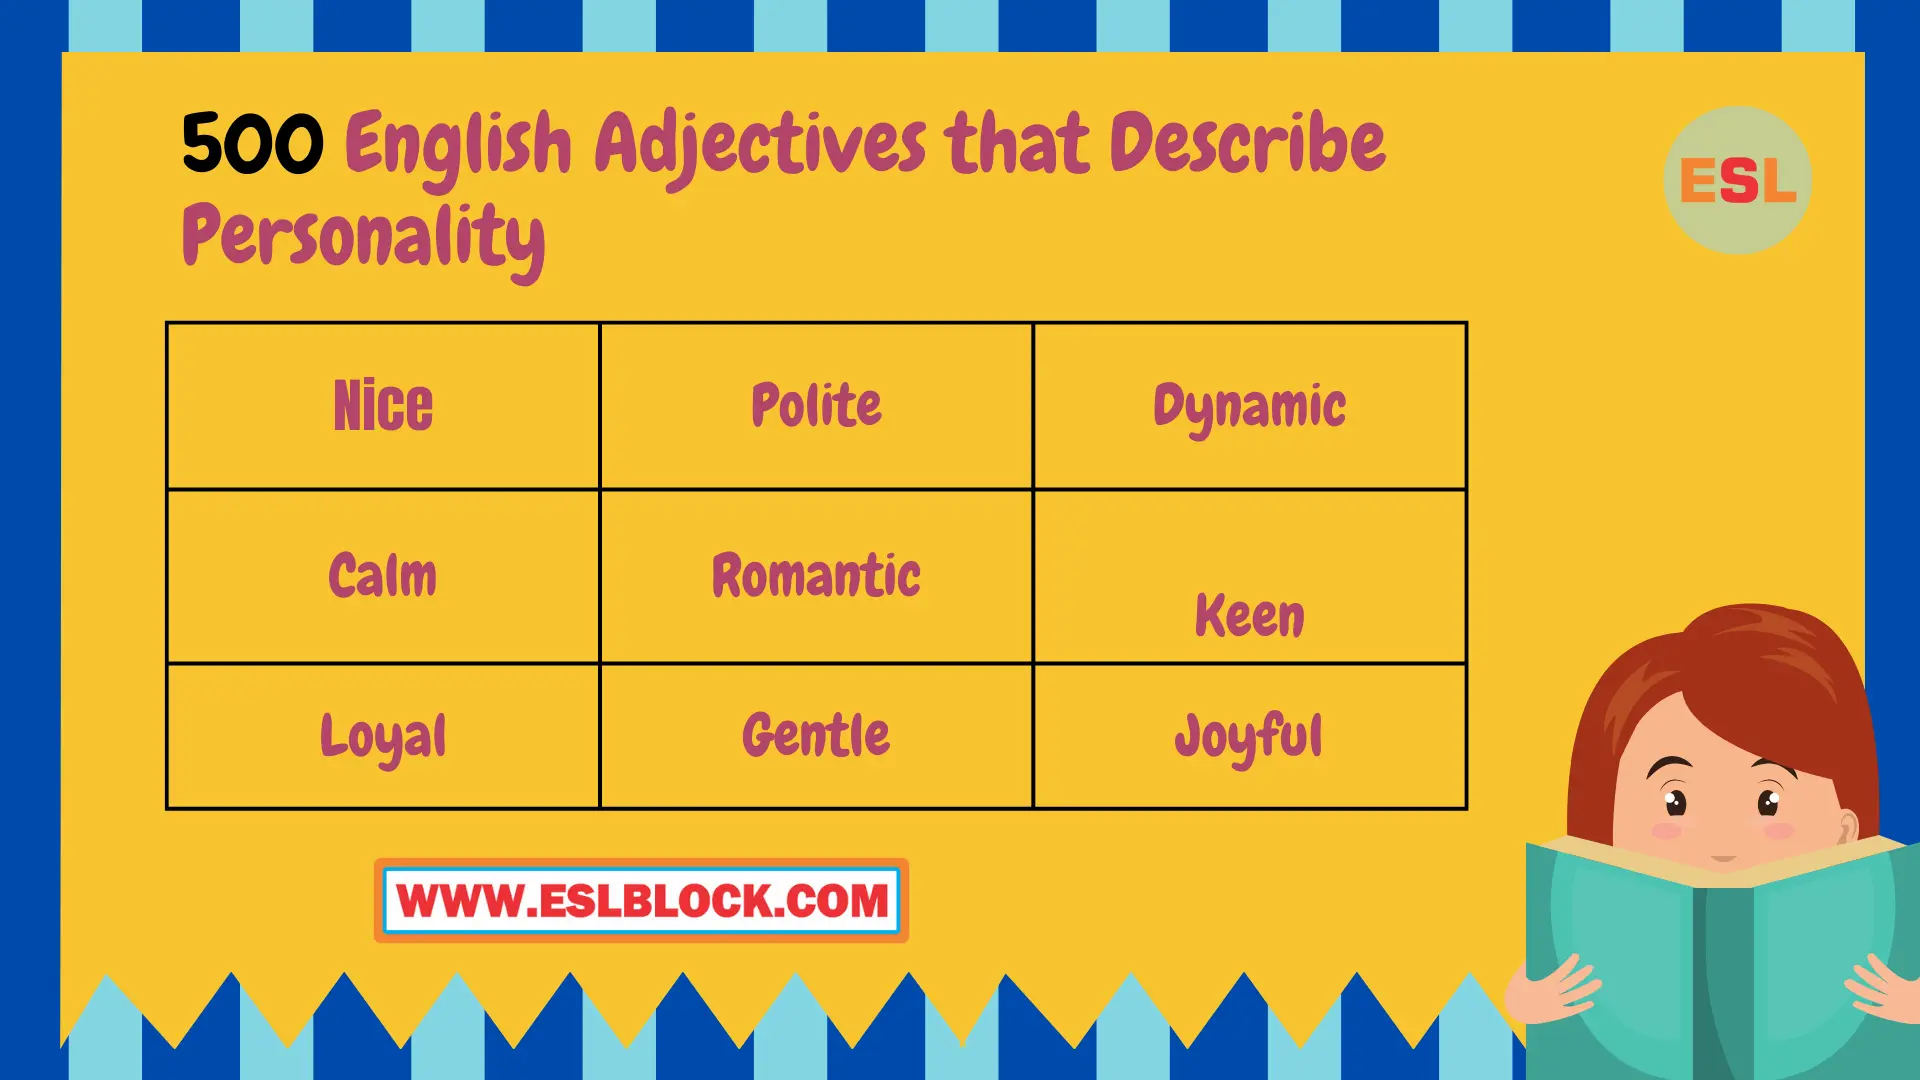 Adjective Words list, Adjectives, Adjectives that Describe Personality, Adjectives to describe a person, Adjectives to describe people, Personality traits, Types of Adjectives, What are Adjectives